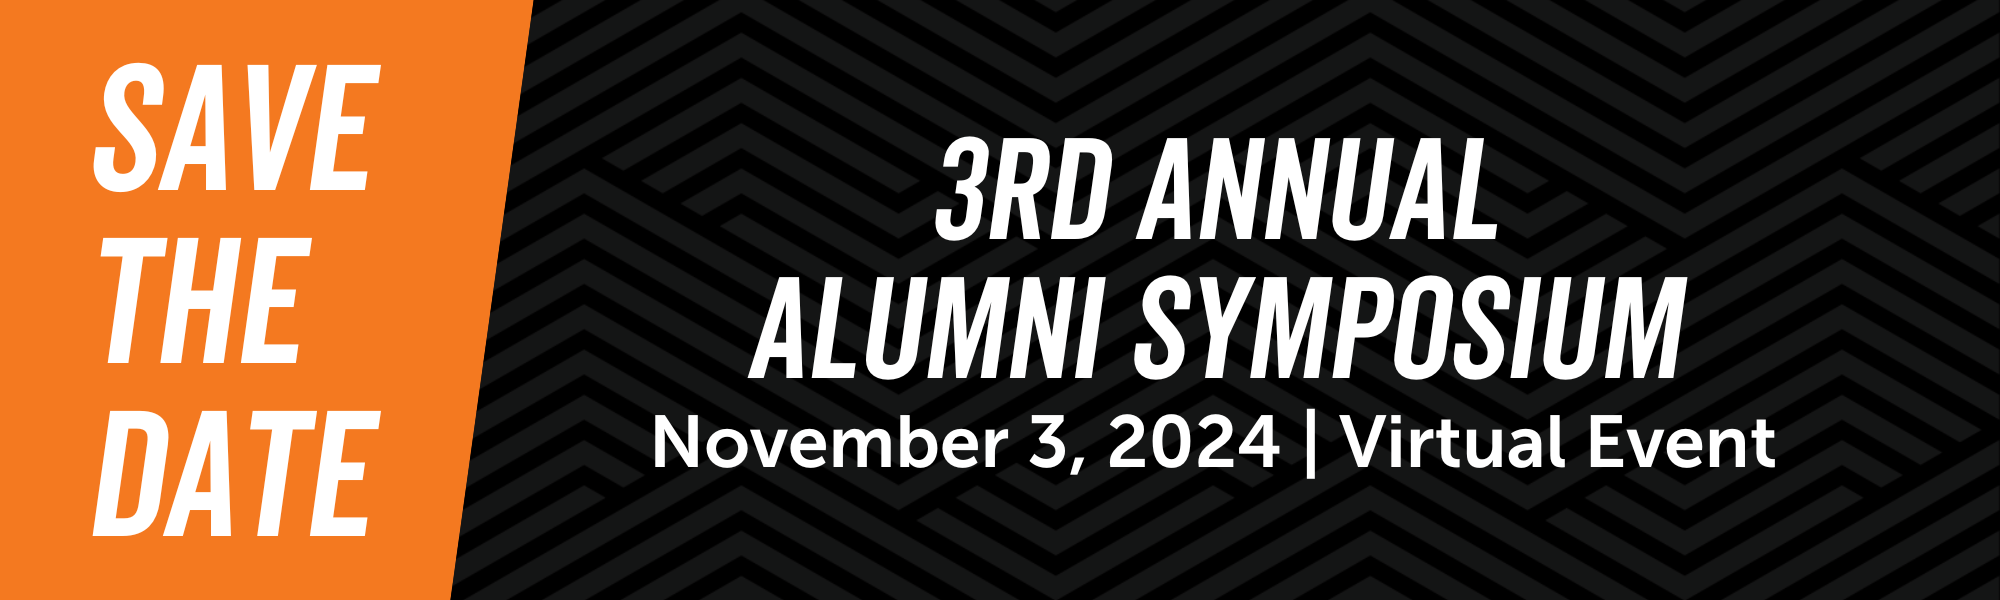 Save the Date: The 3rd Annual Alumni Symposium will be held on November 3, 2024.